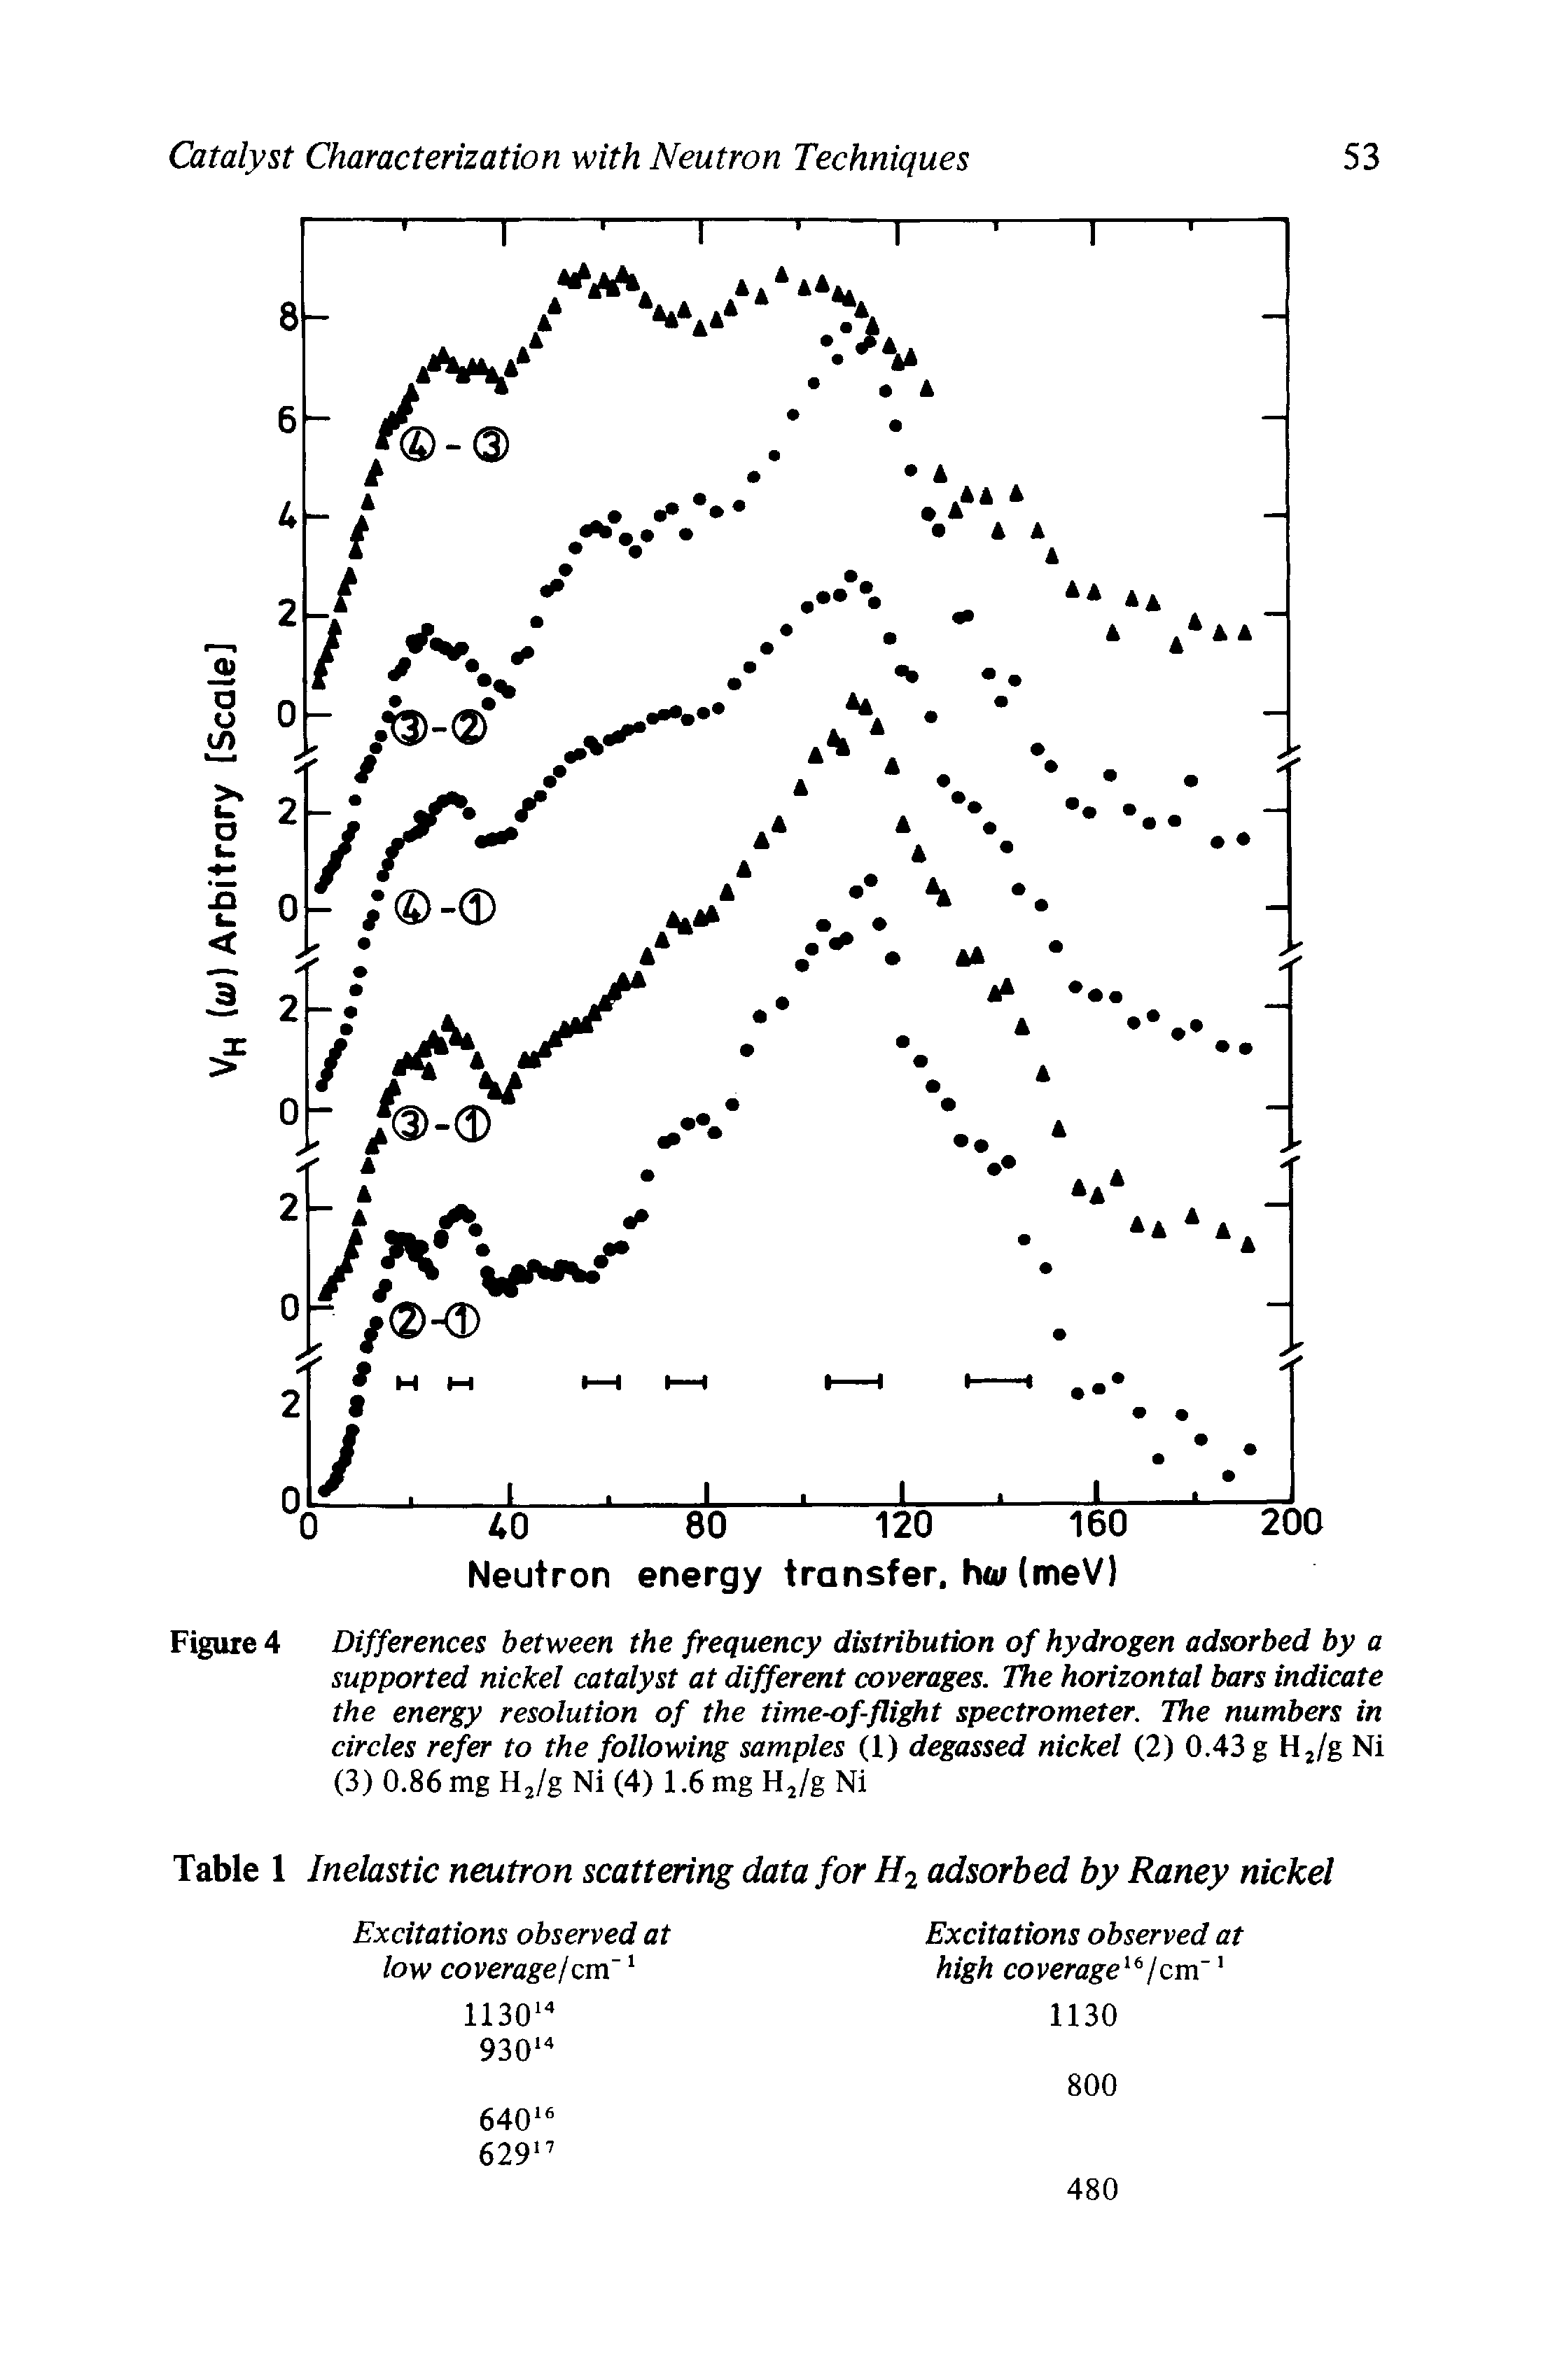 Figure 4 Differences between the frequency distribution of hydrogen adsorbed by a supported nickel catalyst at different coverages. The horizontal bars indicate the energy resolution of the time-of-fligjht spectrometer. The numbers in circles refer to the following samples (1) degassed nickel (2) 0.43 g H2/g Ni (3) 0.86 mg H2/g Ni (4) 1.6 mg H2/g Ni...